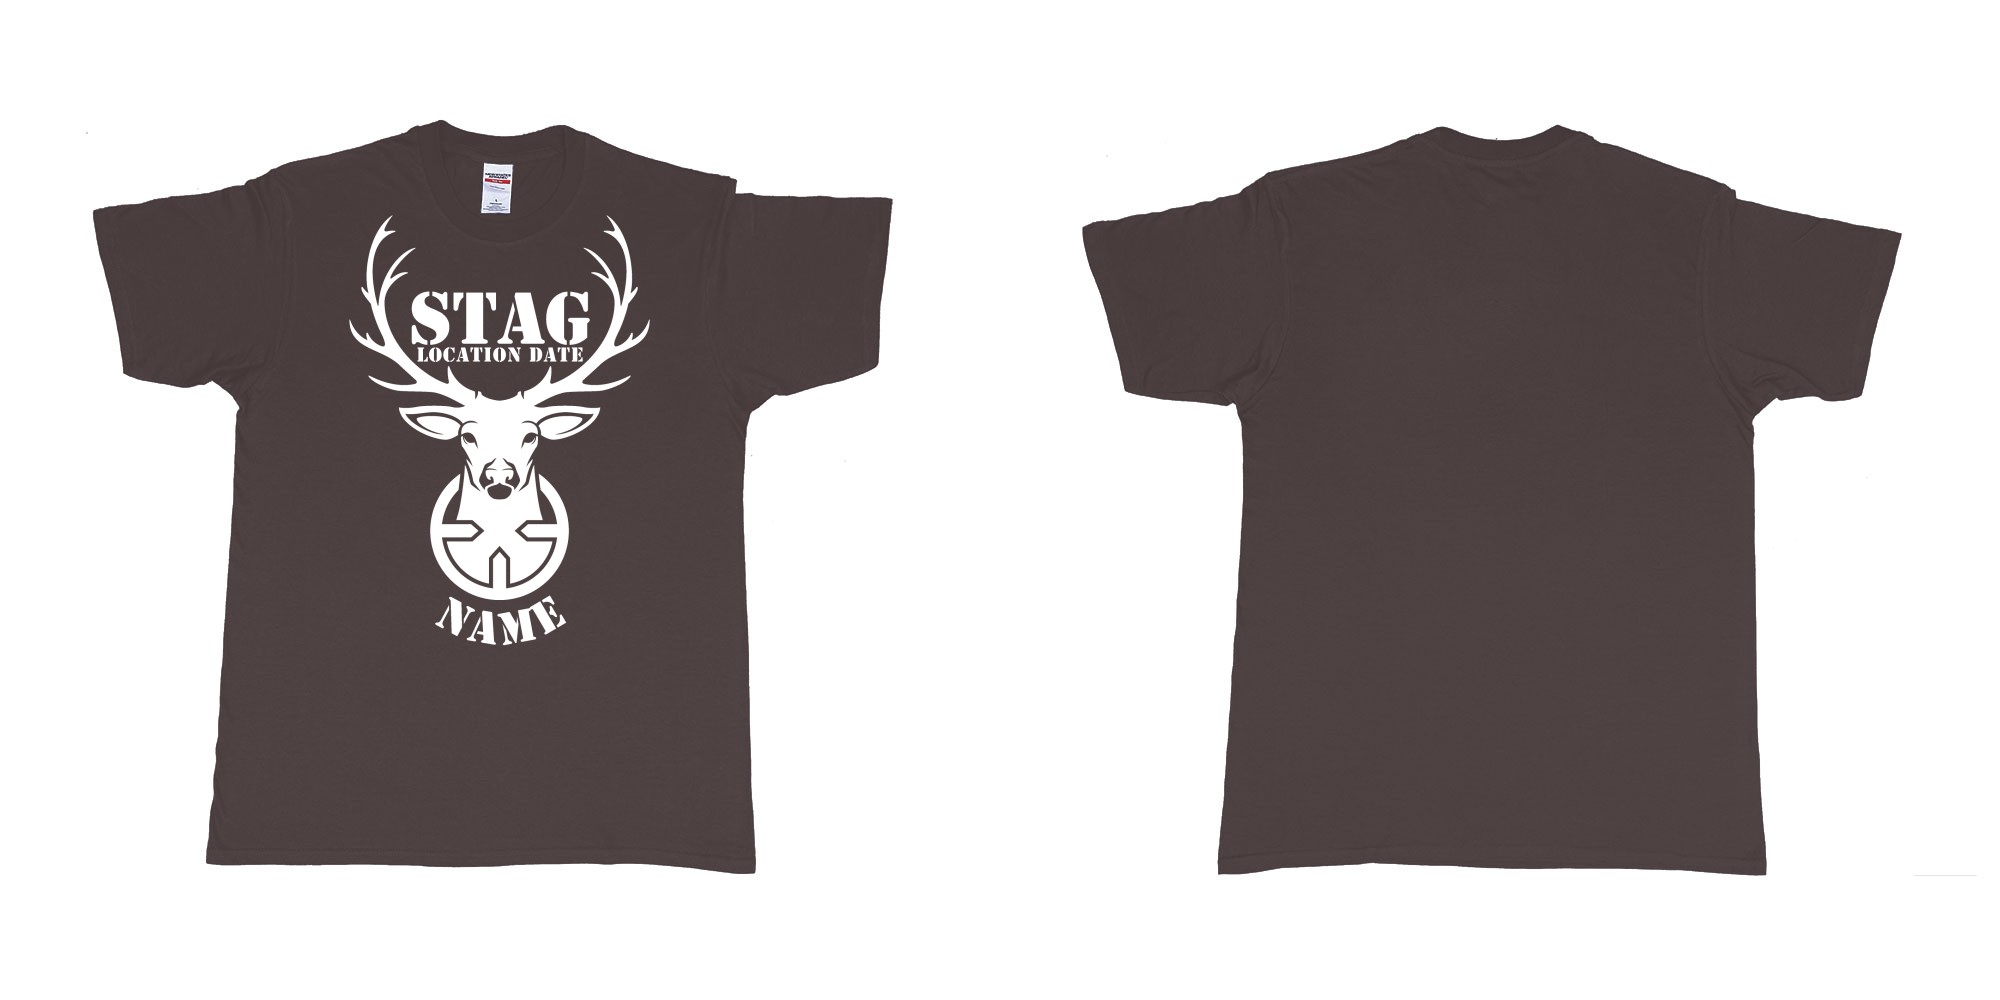 Custom tshirt design aiming for a stag custom tshirt print in fabric color dark-chocolate choice your own text made in Bali by The Pirate Way